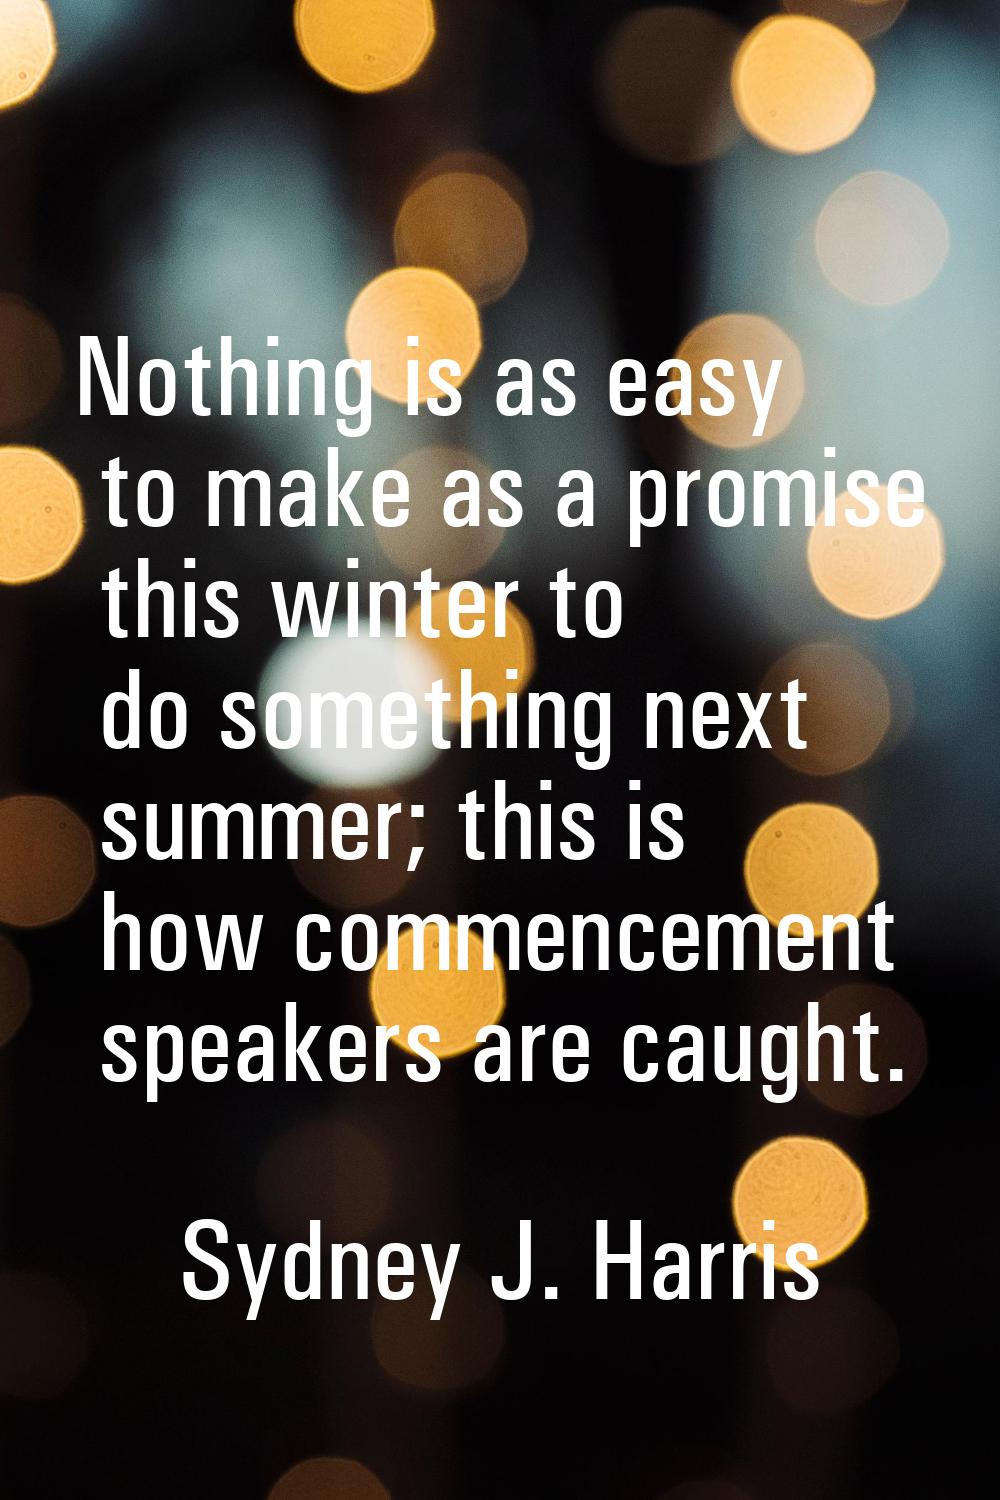 Nothing is as easy to make as a promise this winter to do something next summer; this is how commen